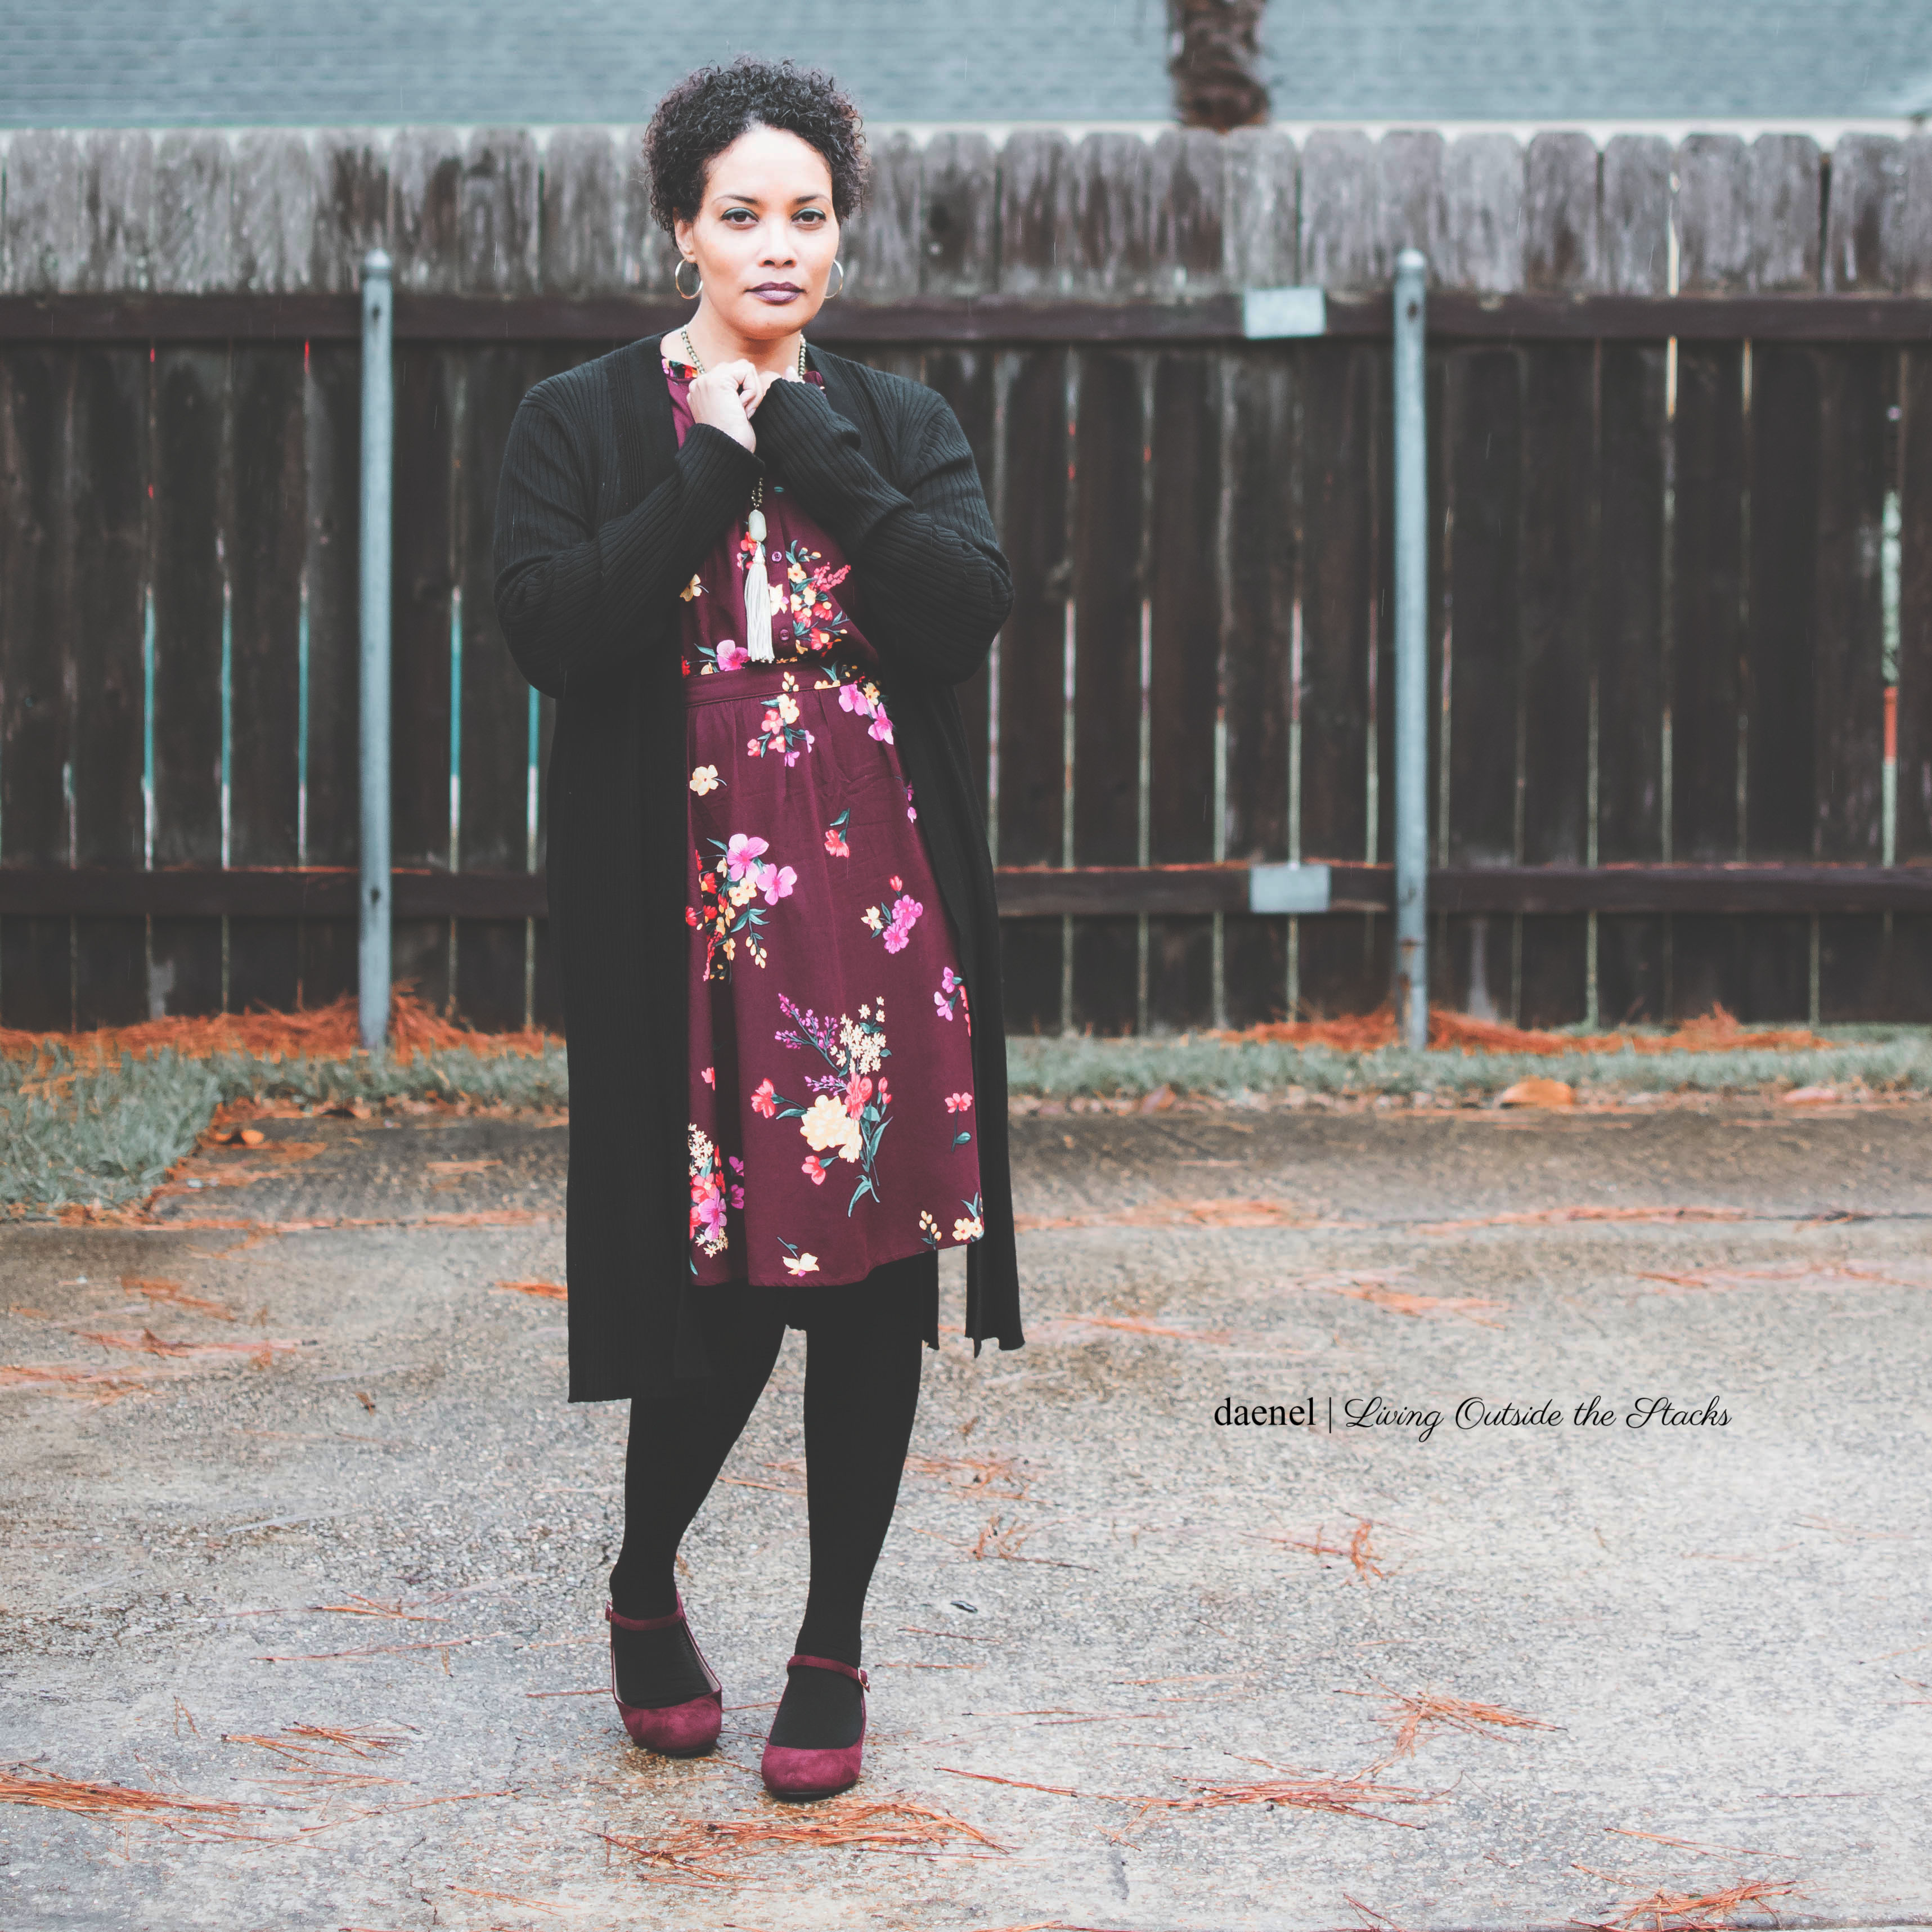  Black Maxi Cardi Old Navy Burgundy Floral Dress Black Tights and Burgundy Mary Jane Wedges {living outside the stacks}